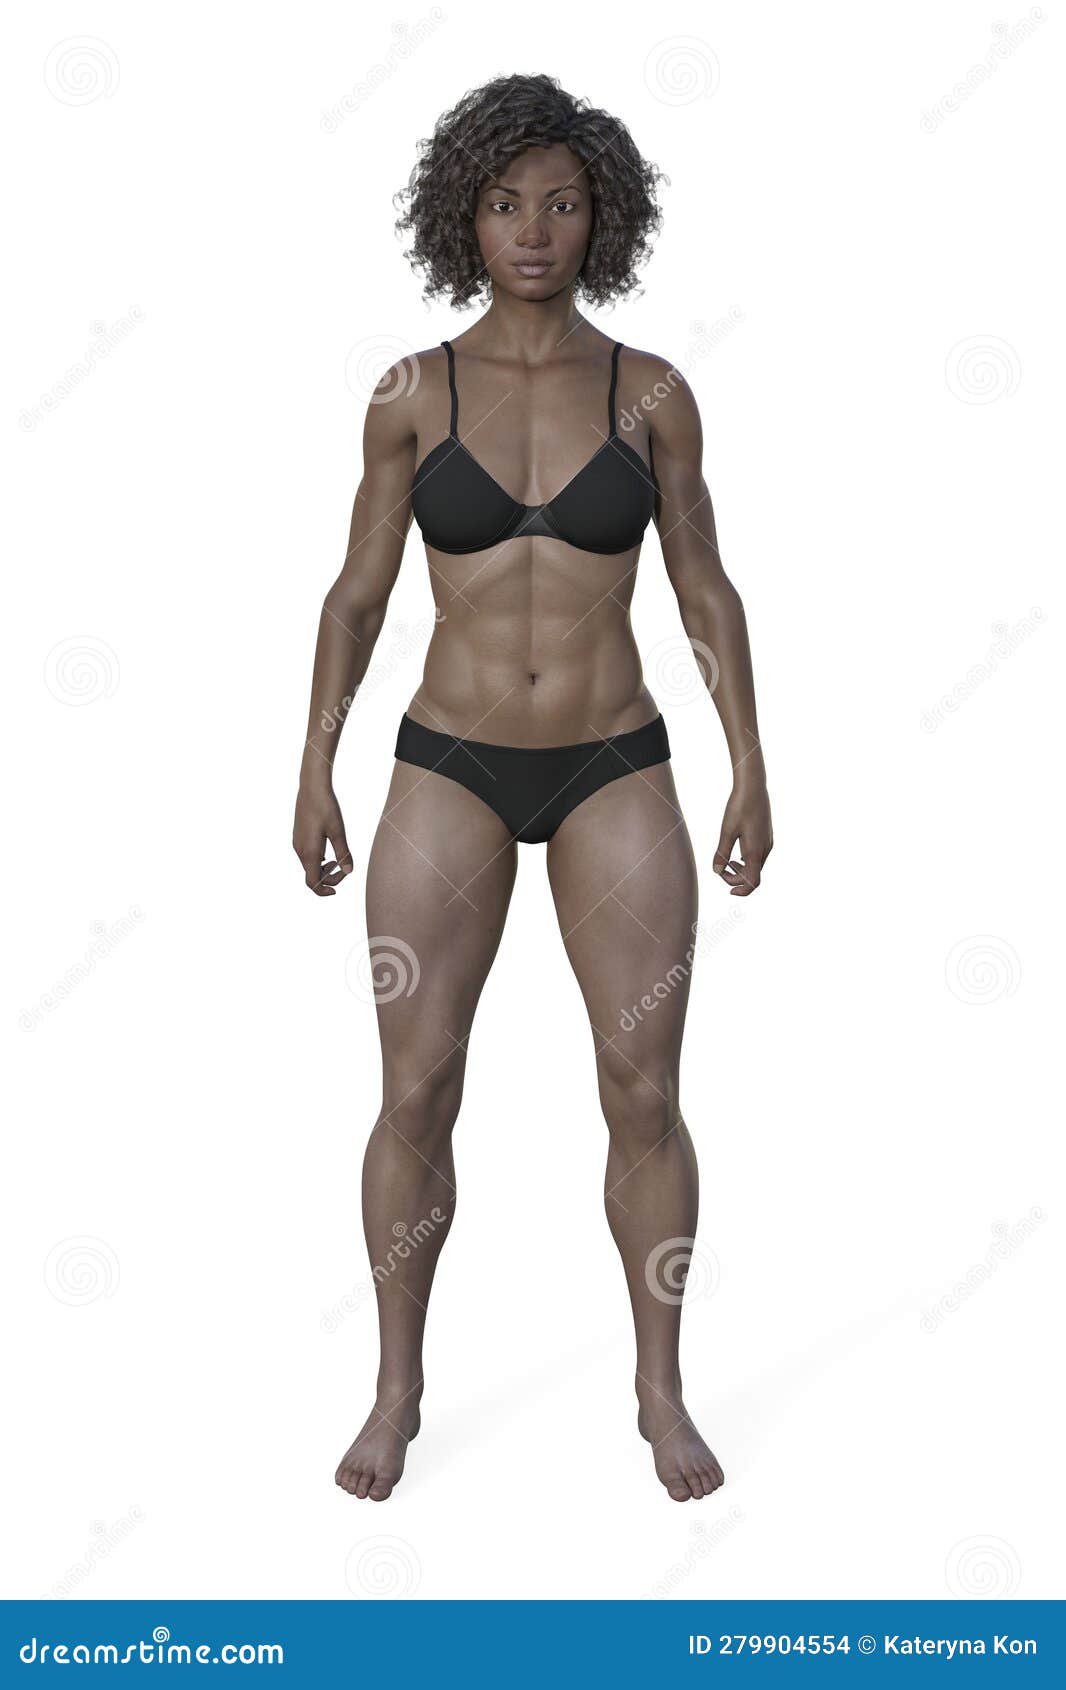 A 3D Illustration of a Female Body with Mesomorph Body Type Stock